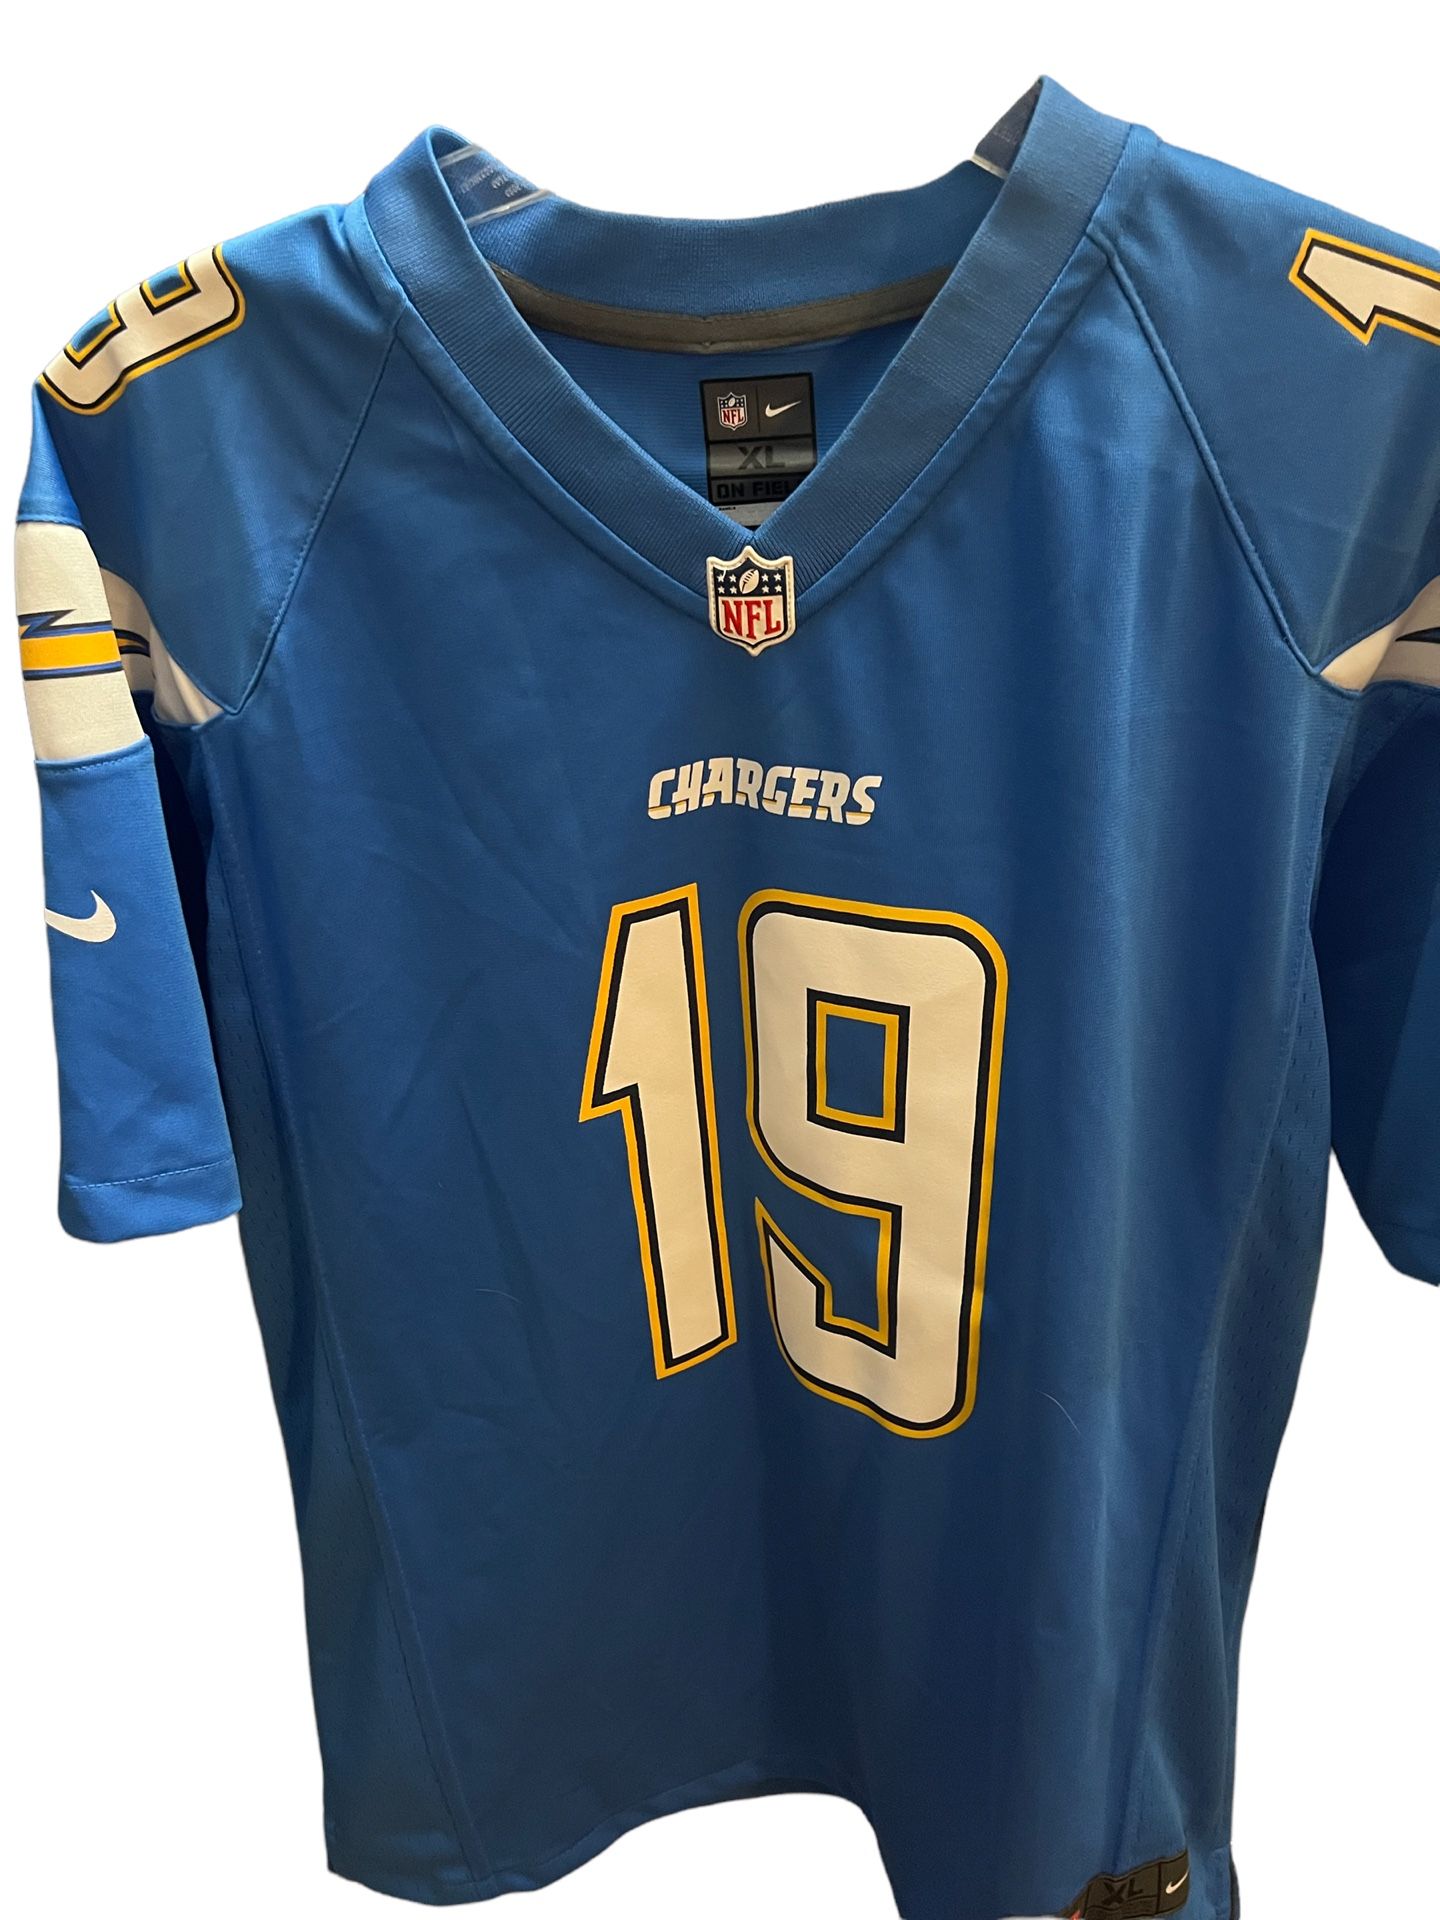 Chargers Throwback Jersey Youth Xl 